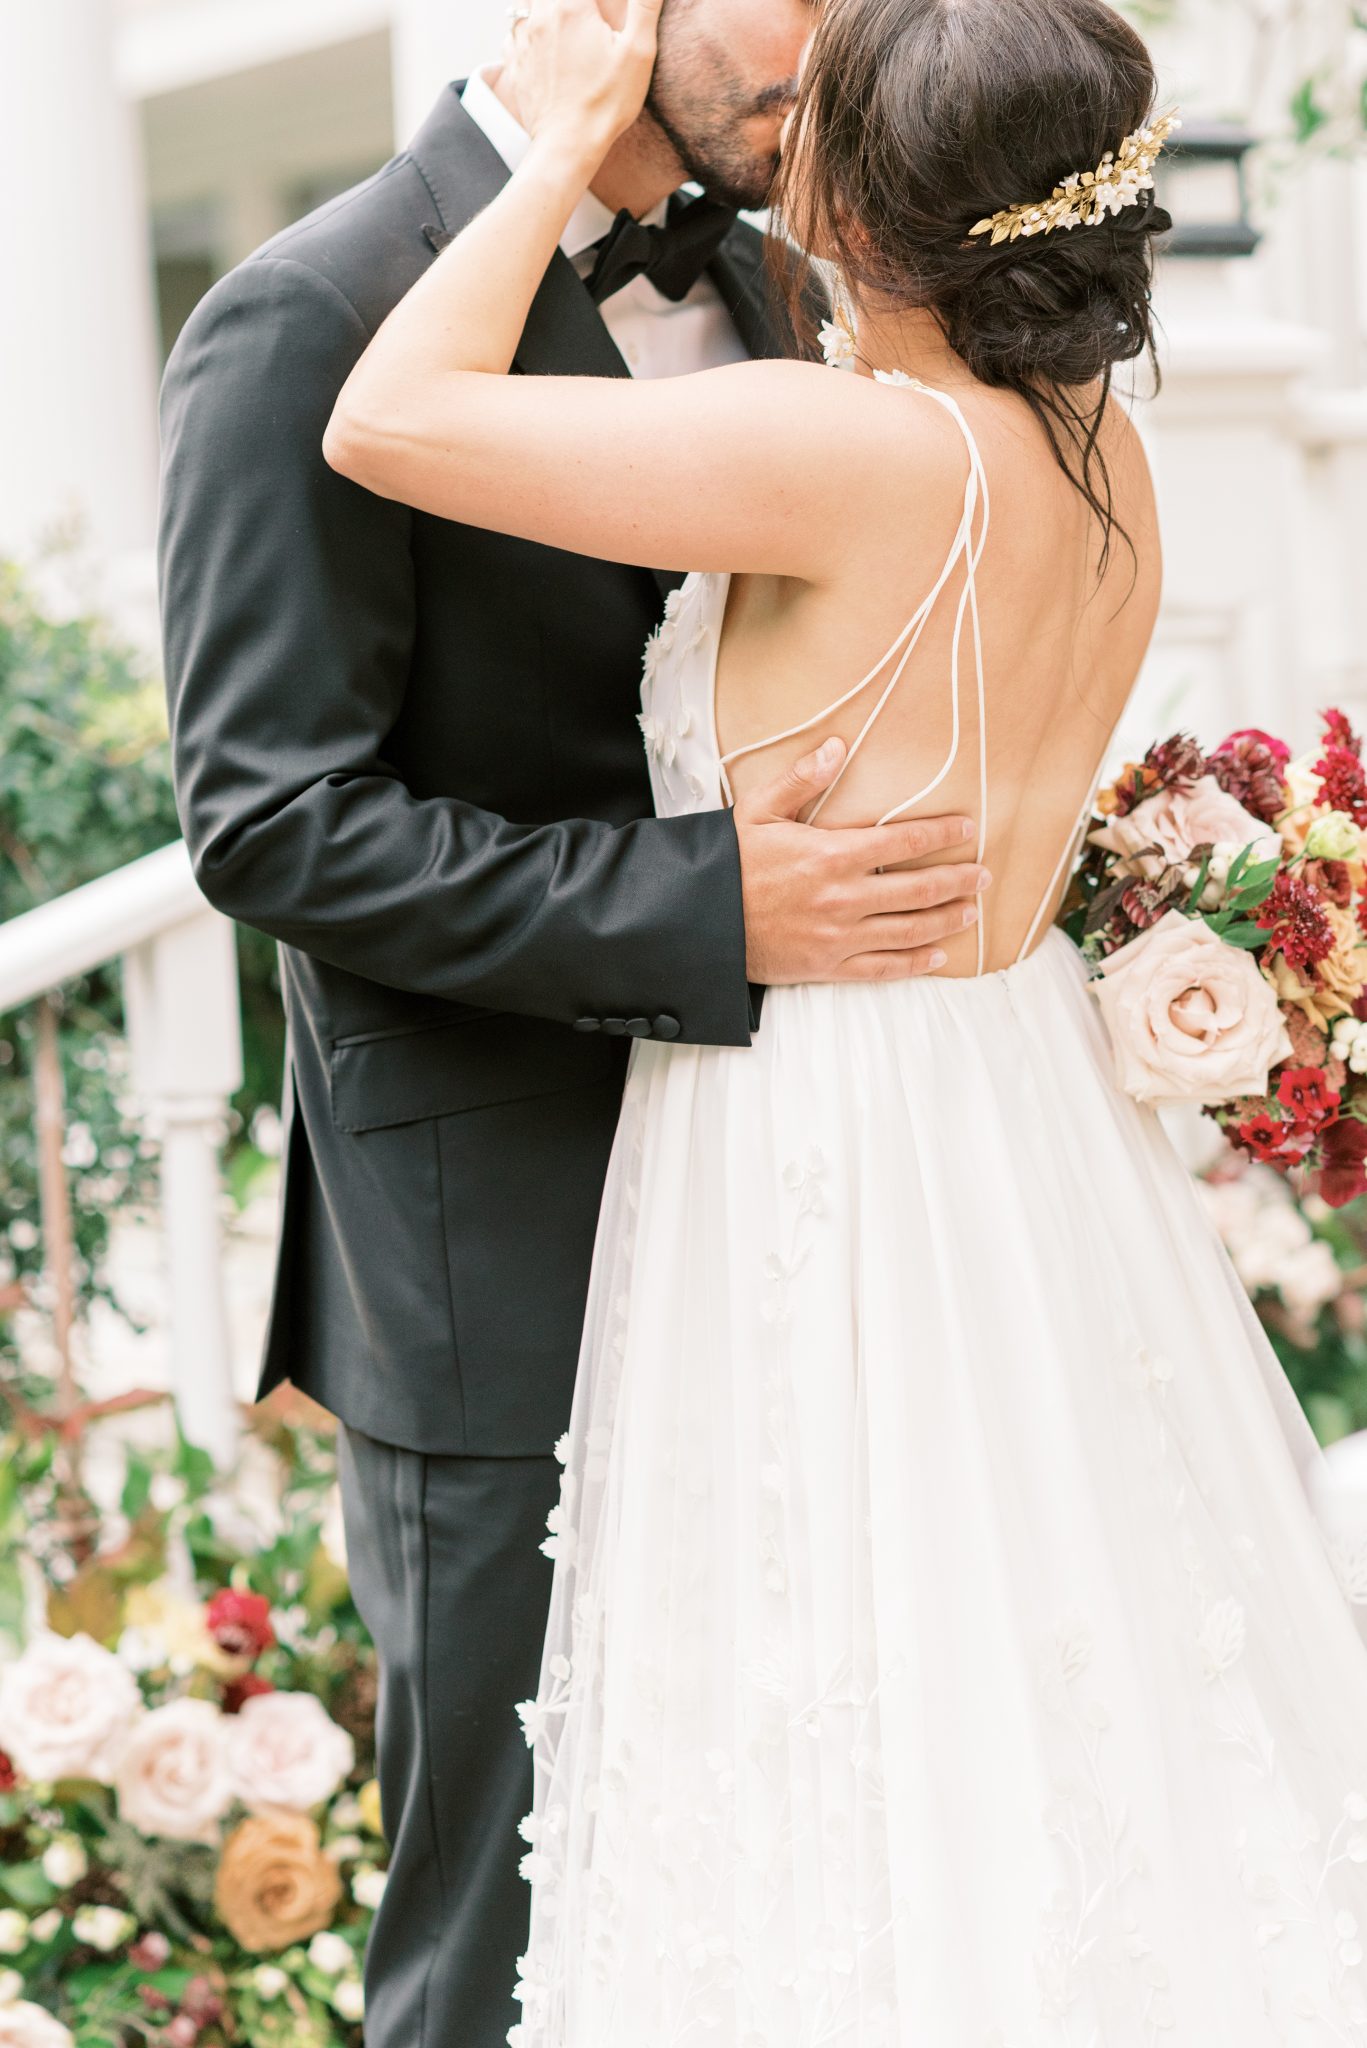 Bride and groom share a kiss in this enchanting estate wedding with berry and honey flowers